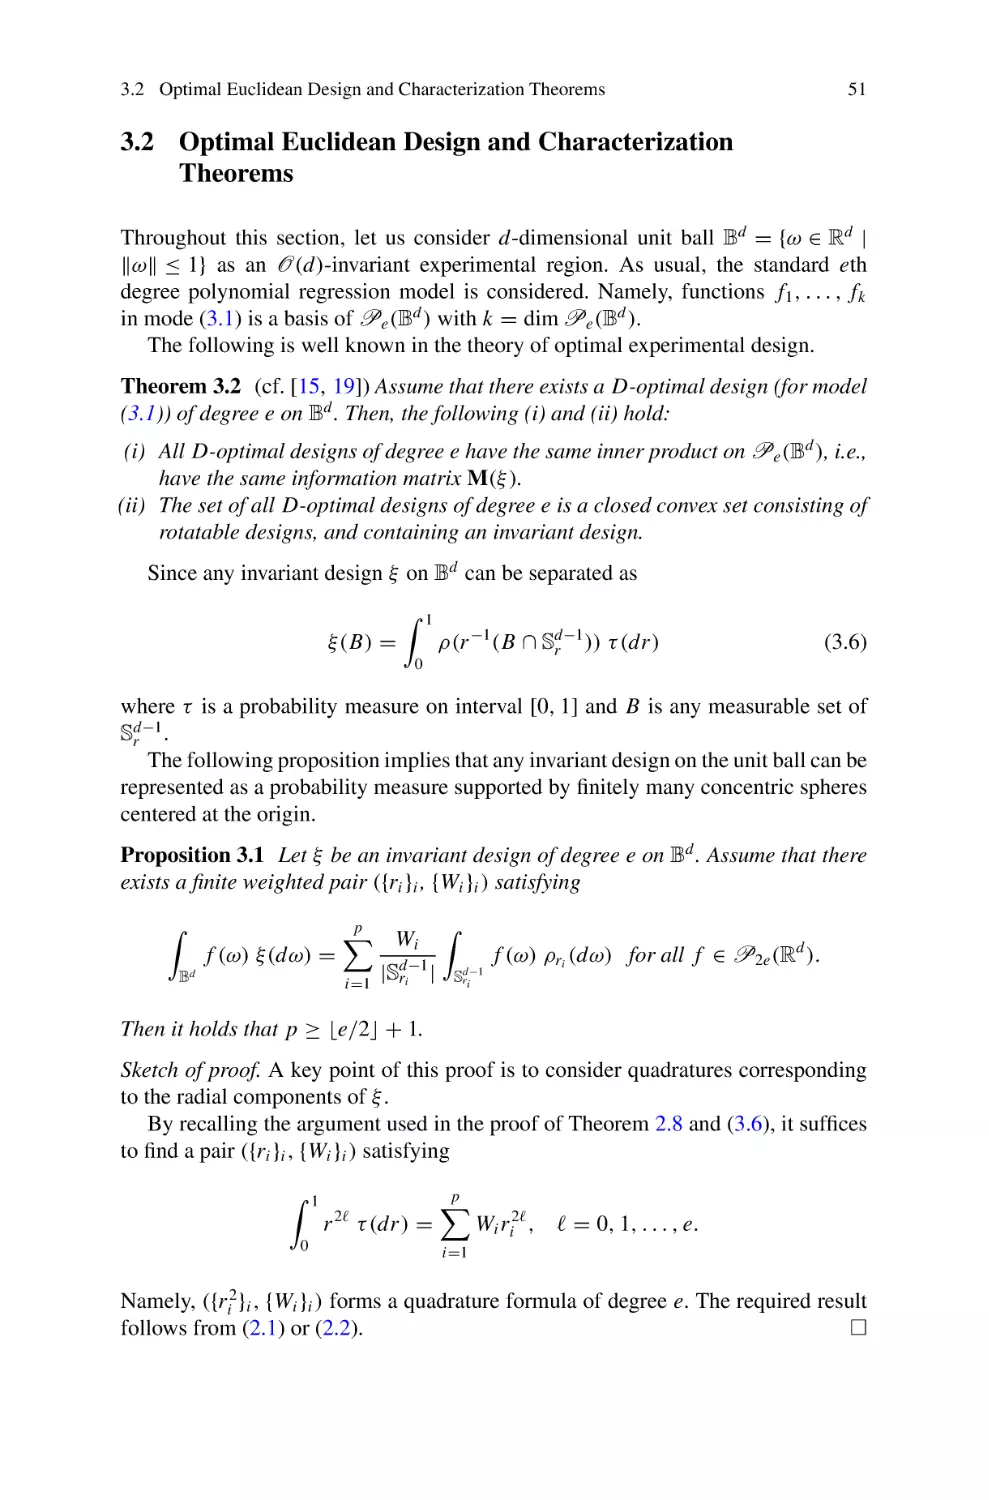 3.2 Optimal Euclidean Design and Characterization Theorems